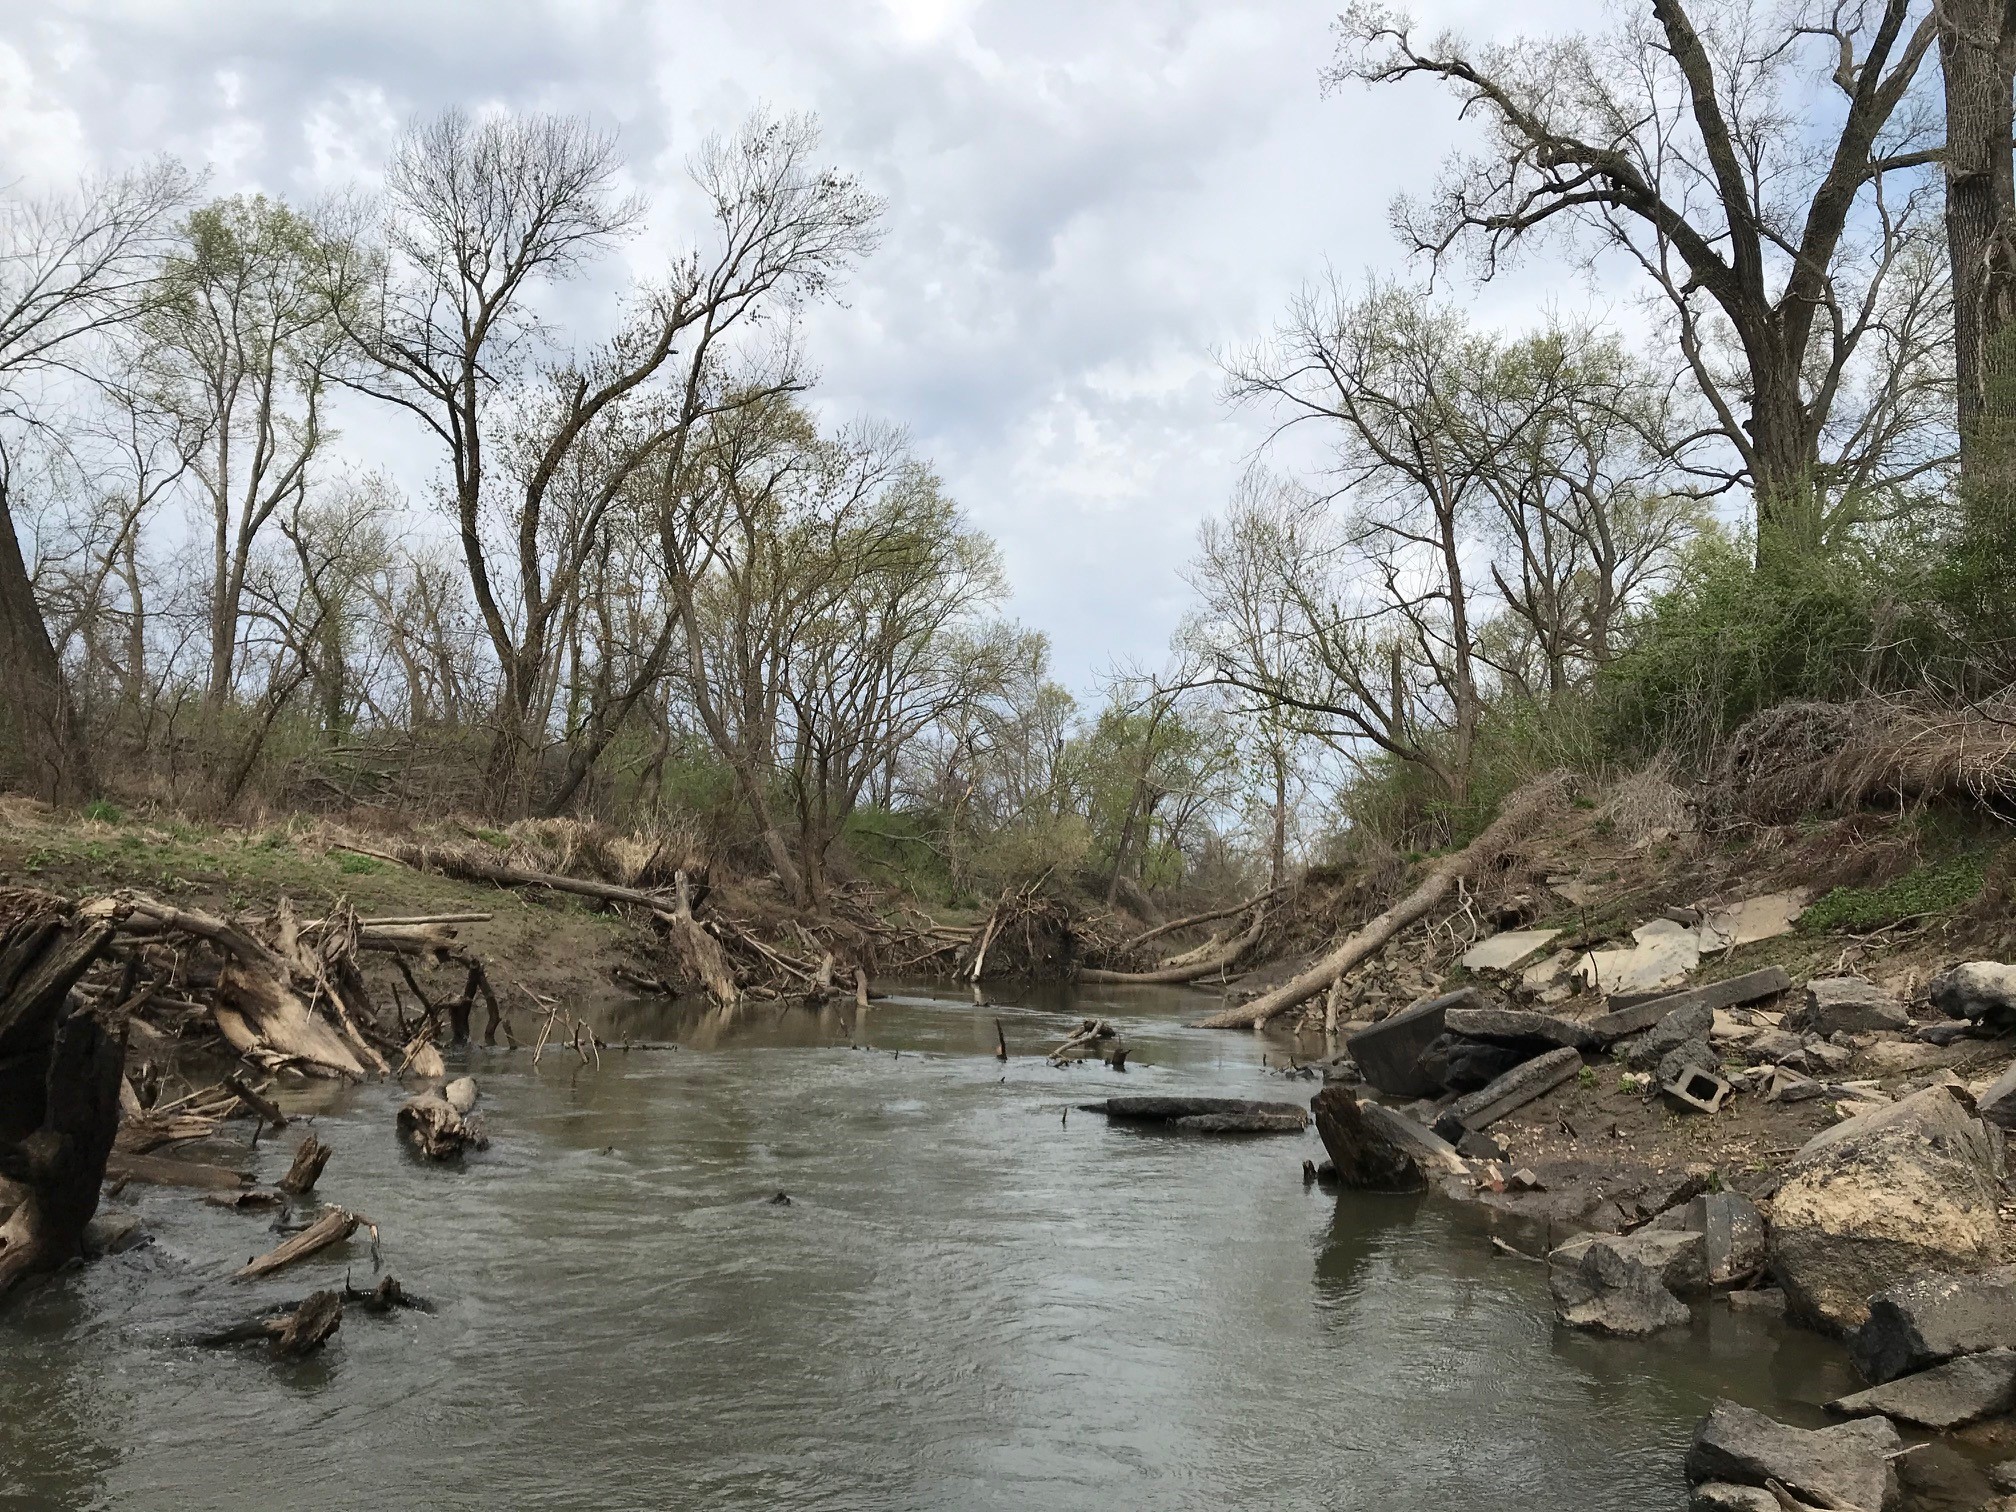 Facing upstream at the upper Wakarusa River site, 6 April 2021.